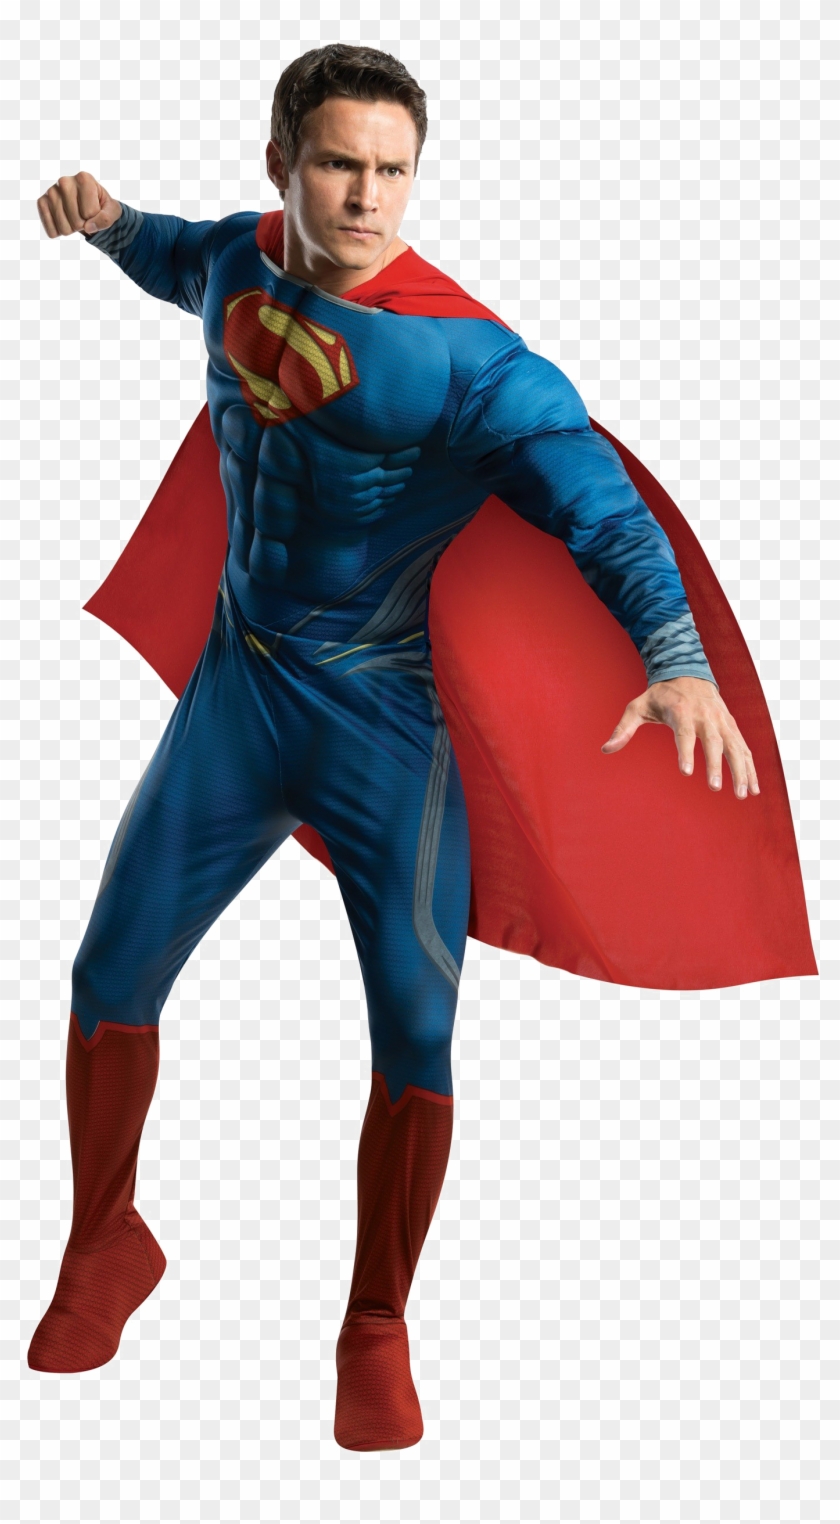 Superman Png Background Image - Halloween Costumes Superman Clipart #583057